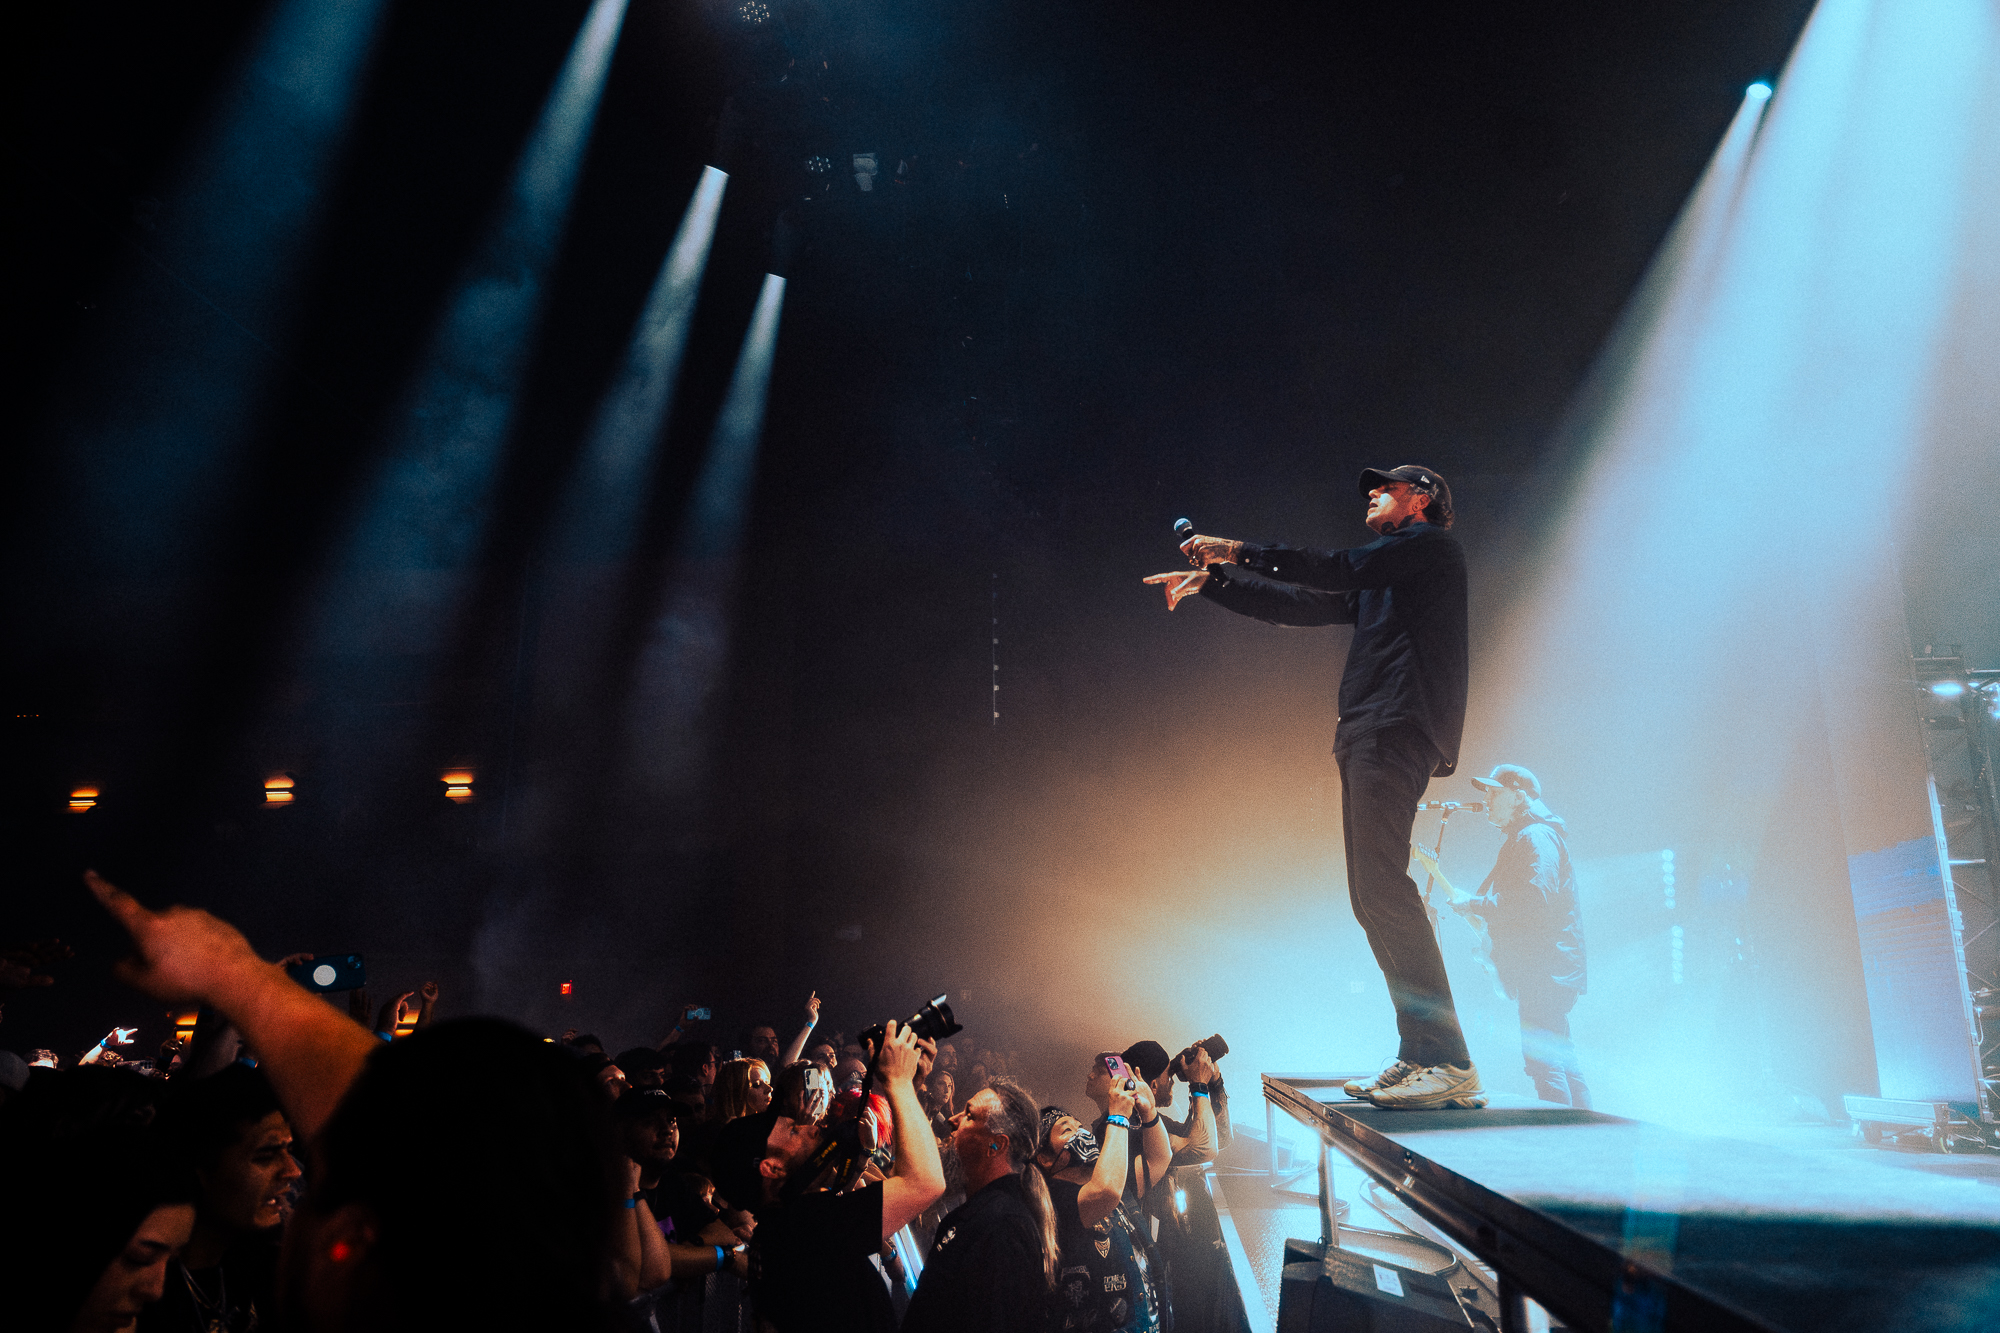 ‘Let The Ocean Take Me 10th Anniversary North American Tour’ Featuring The Amity Affliction, Currents, Dying Wish, and Mugshot – Wheatland, CA – 4.27.24